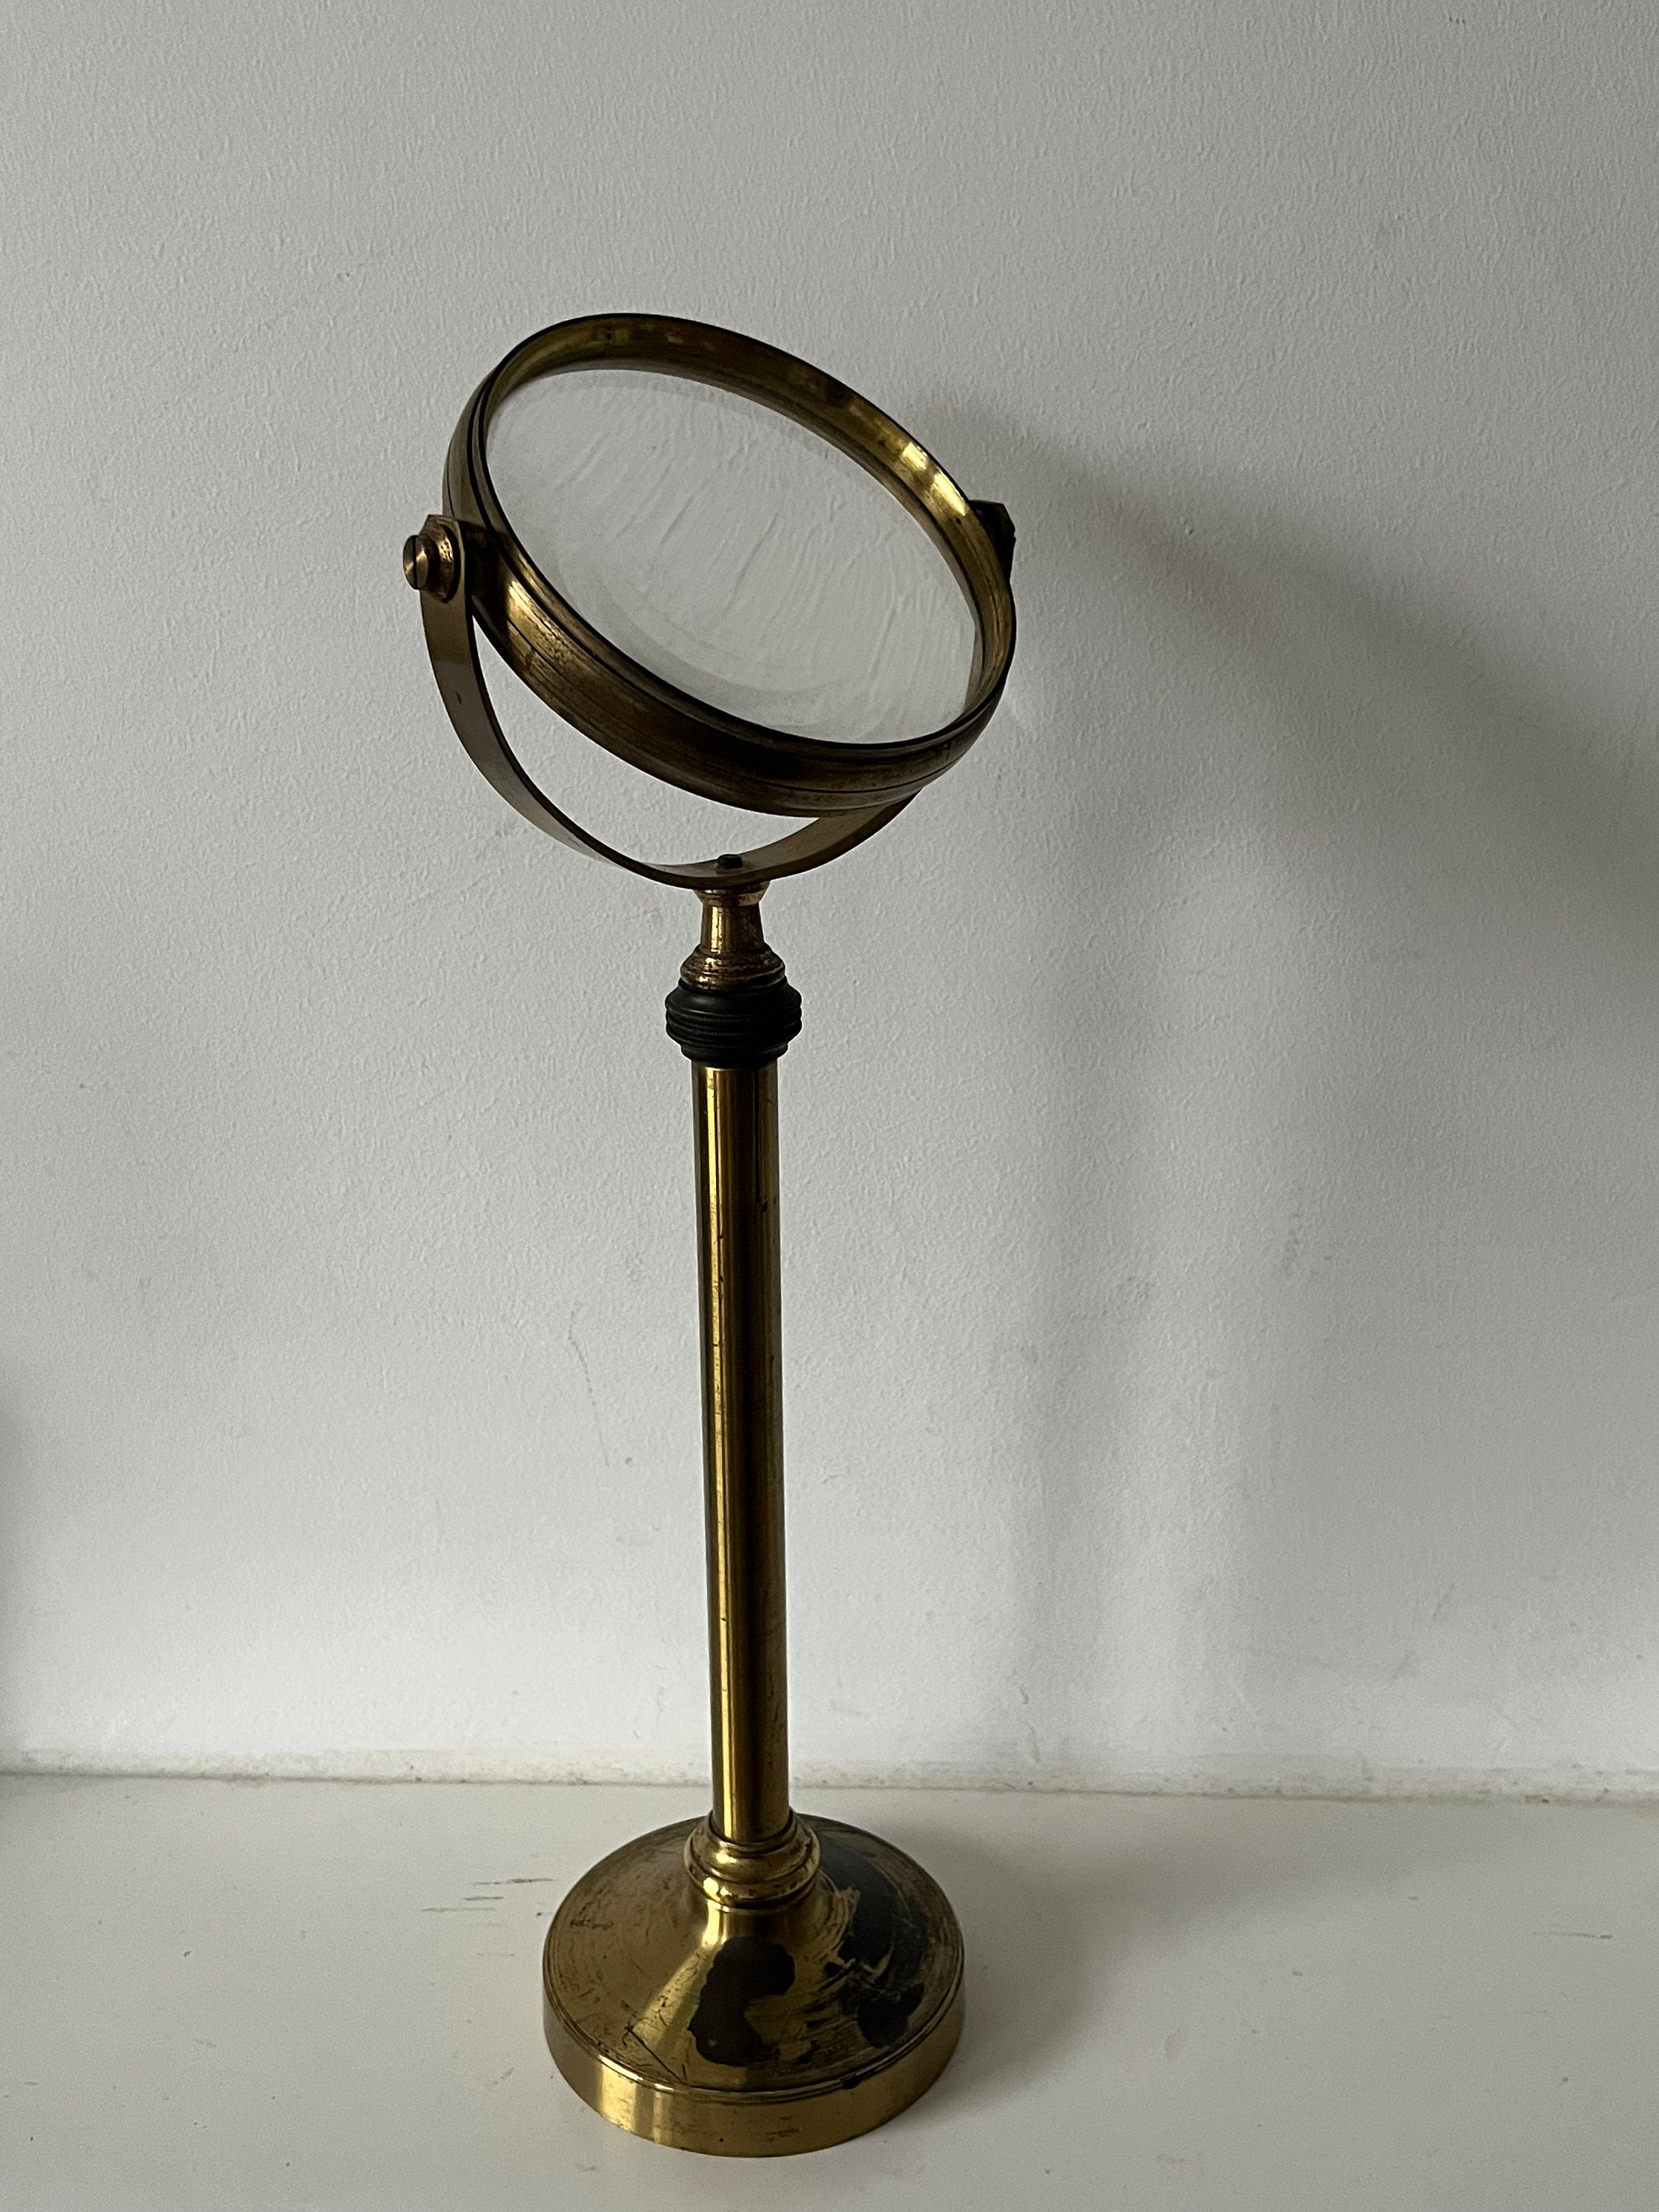 Antique Brass Magnifier Maritime Adjustable stand Magnifying Glass Desk Top  Gift